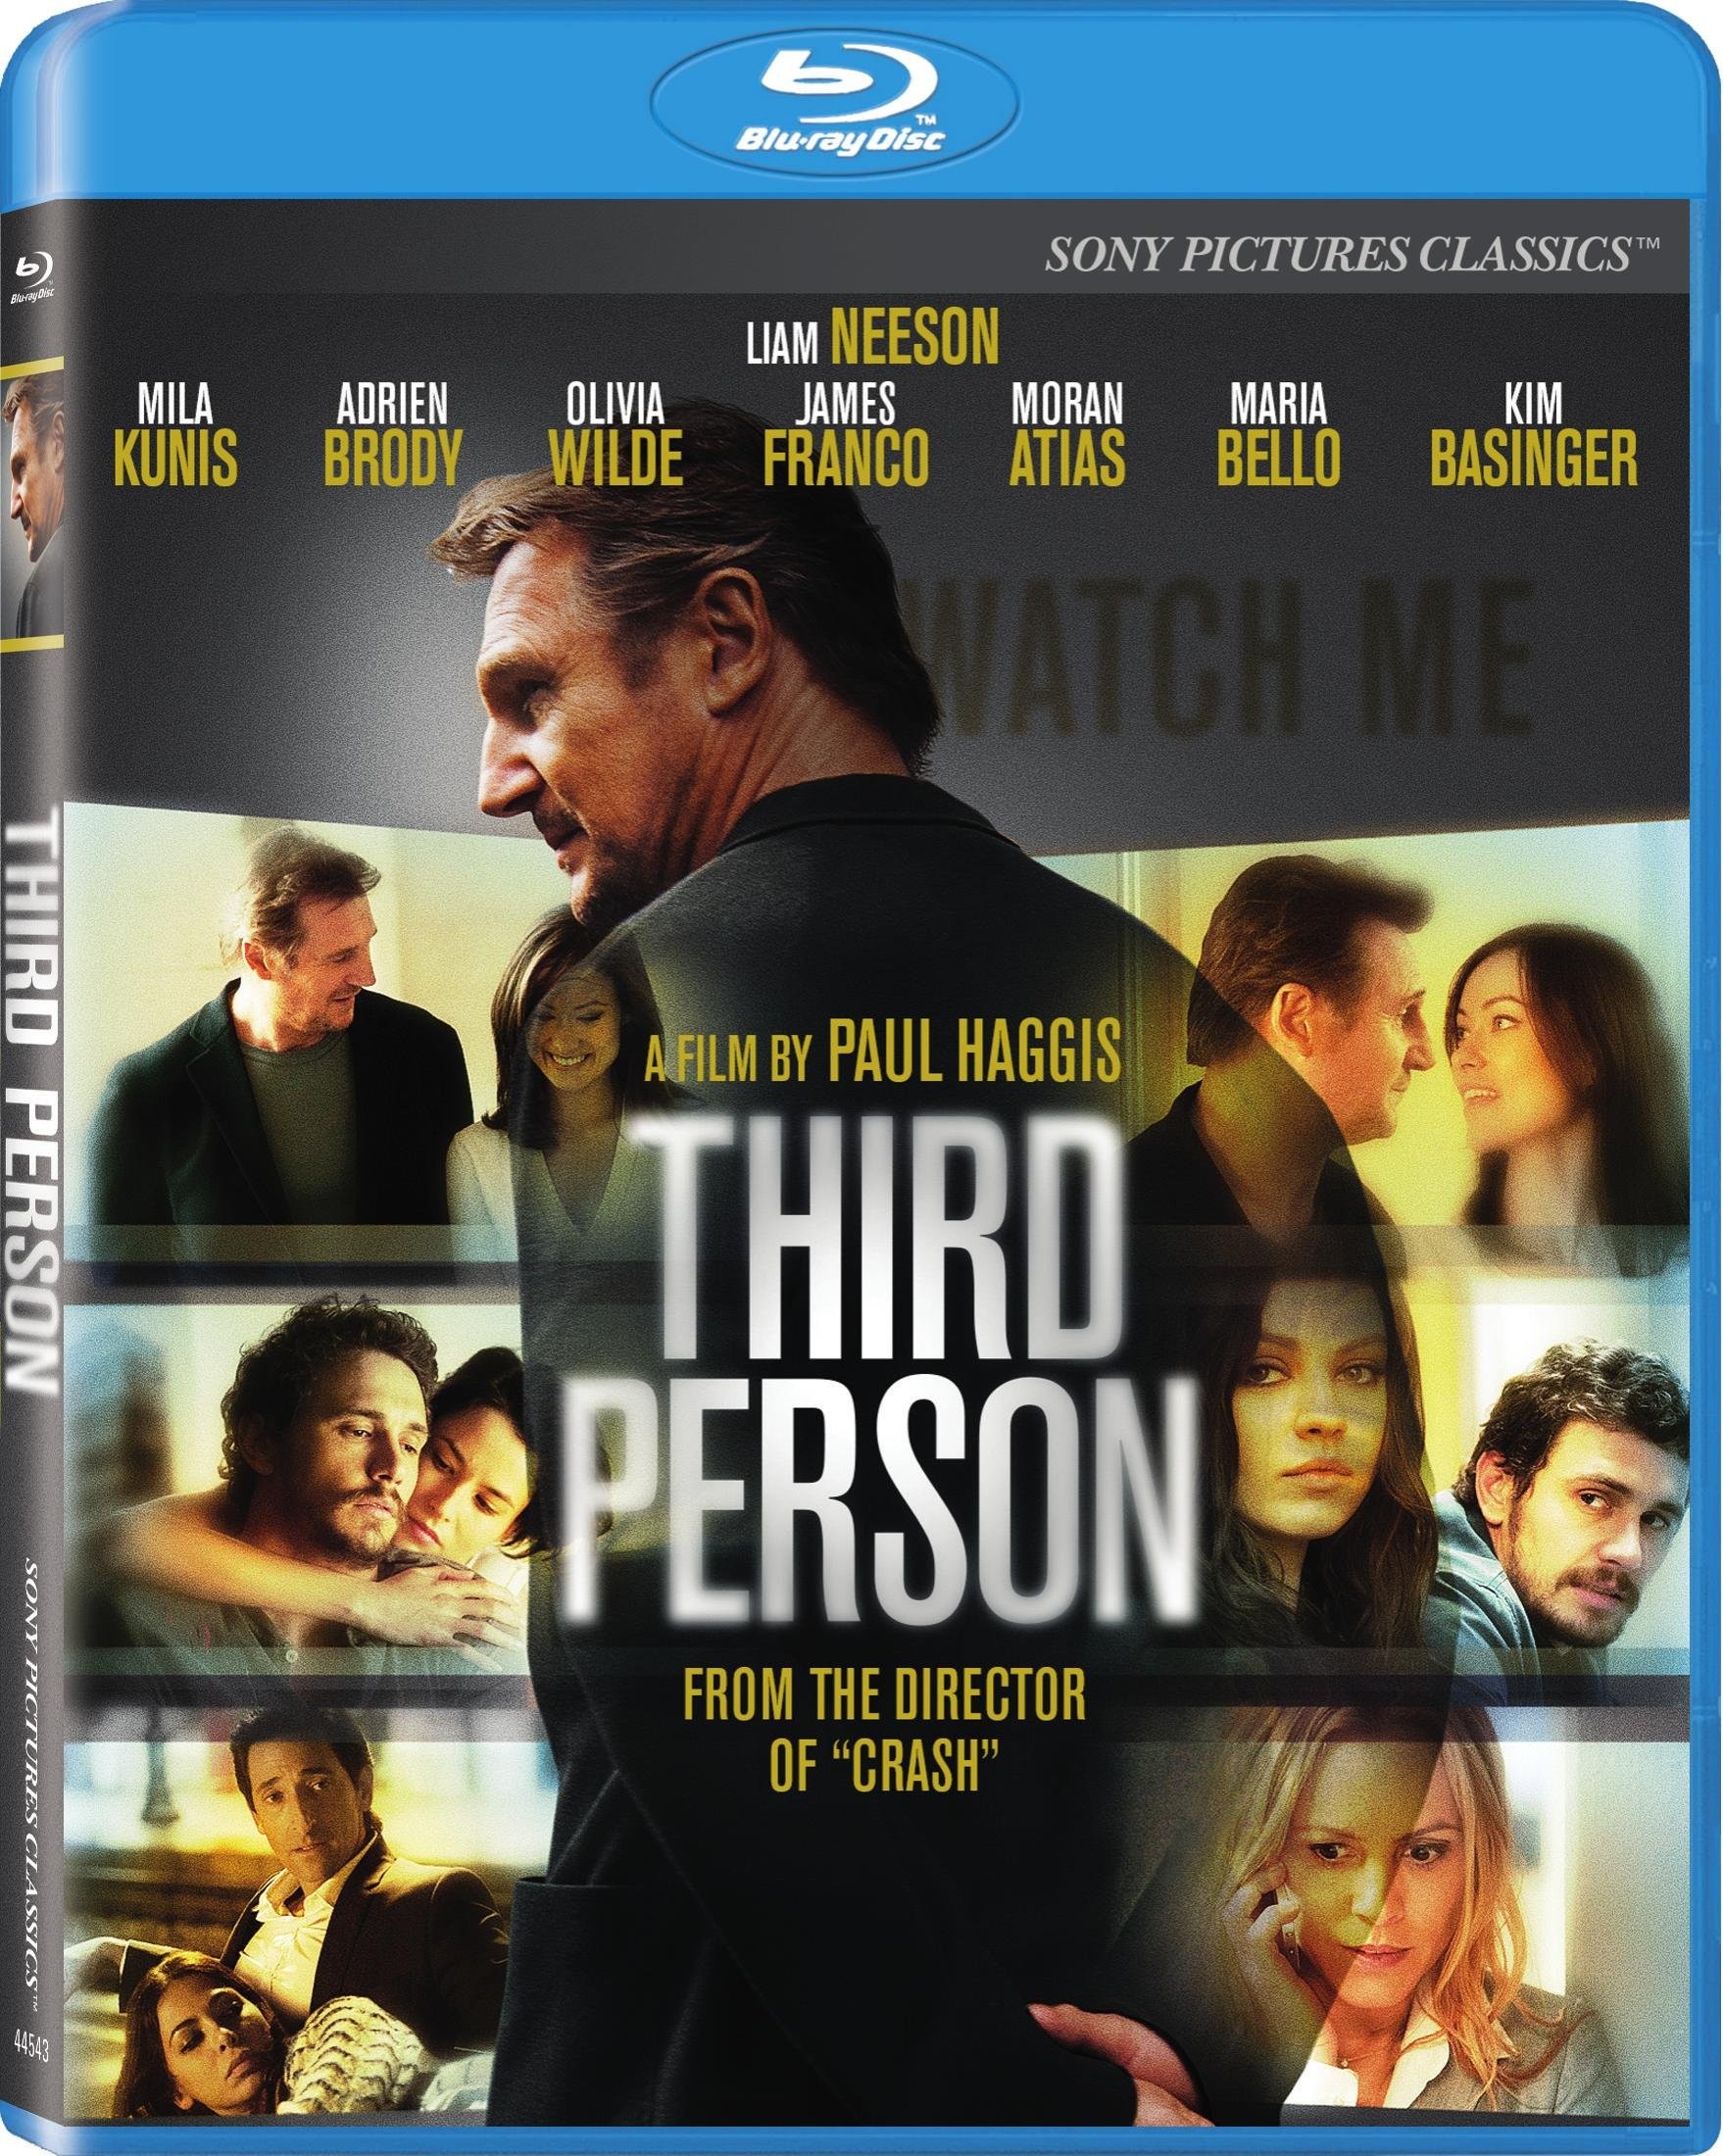 Third Person Blu-ray Review